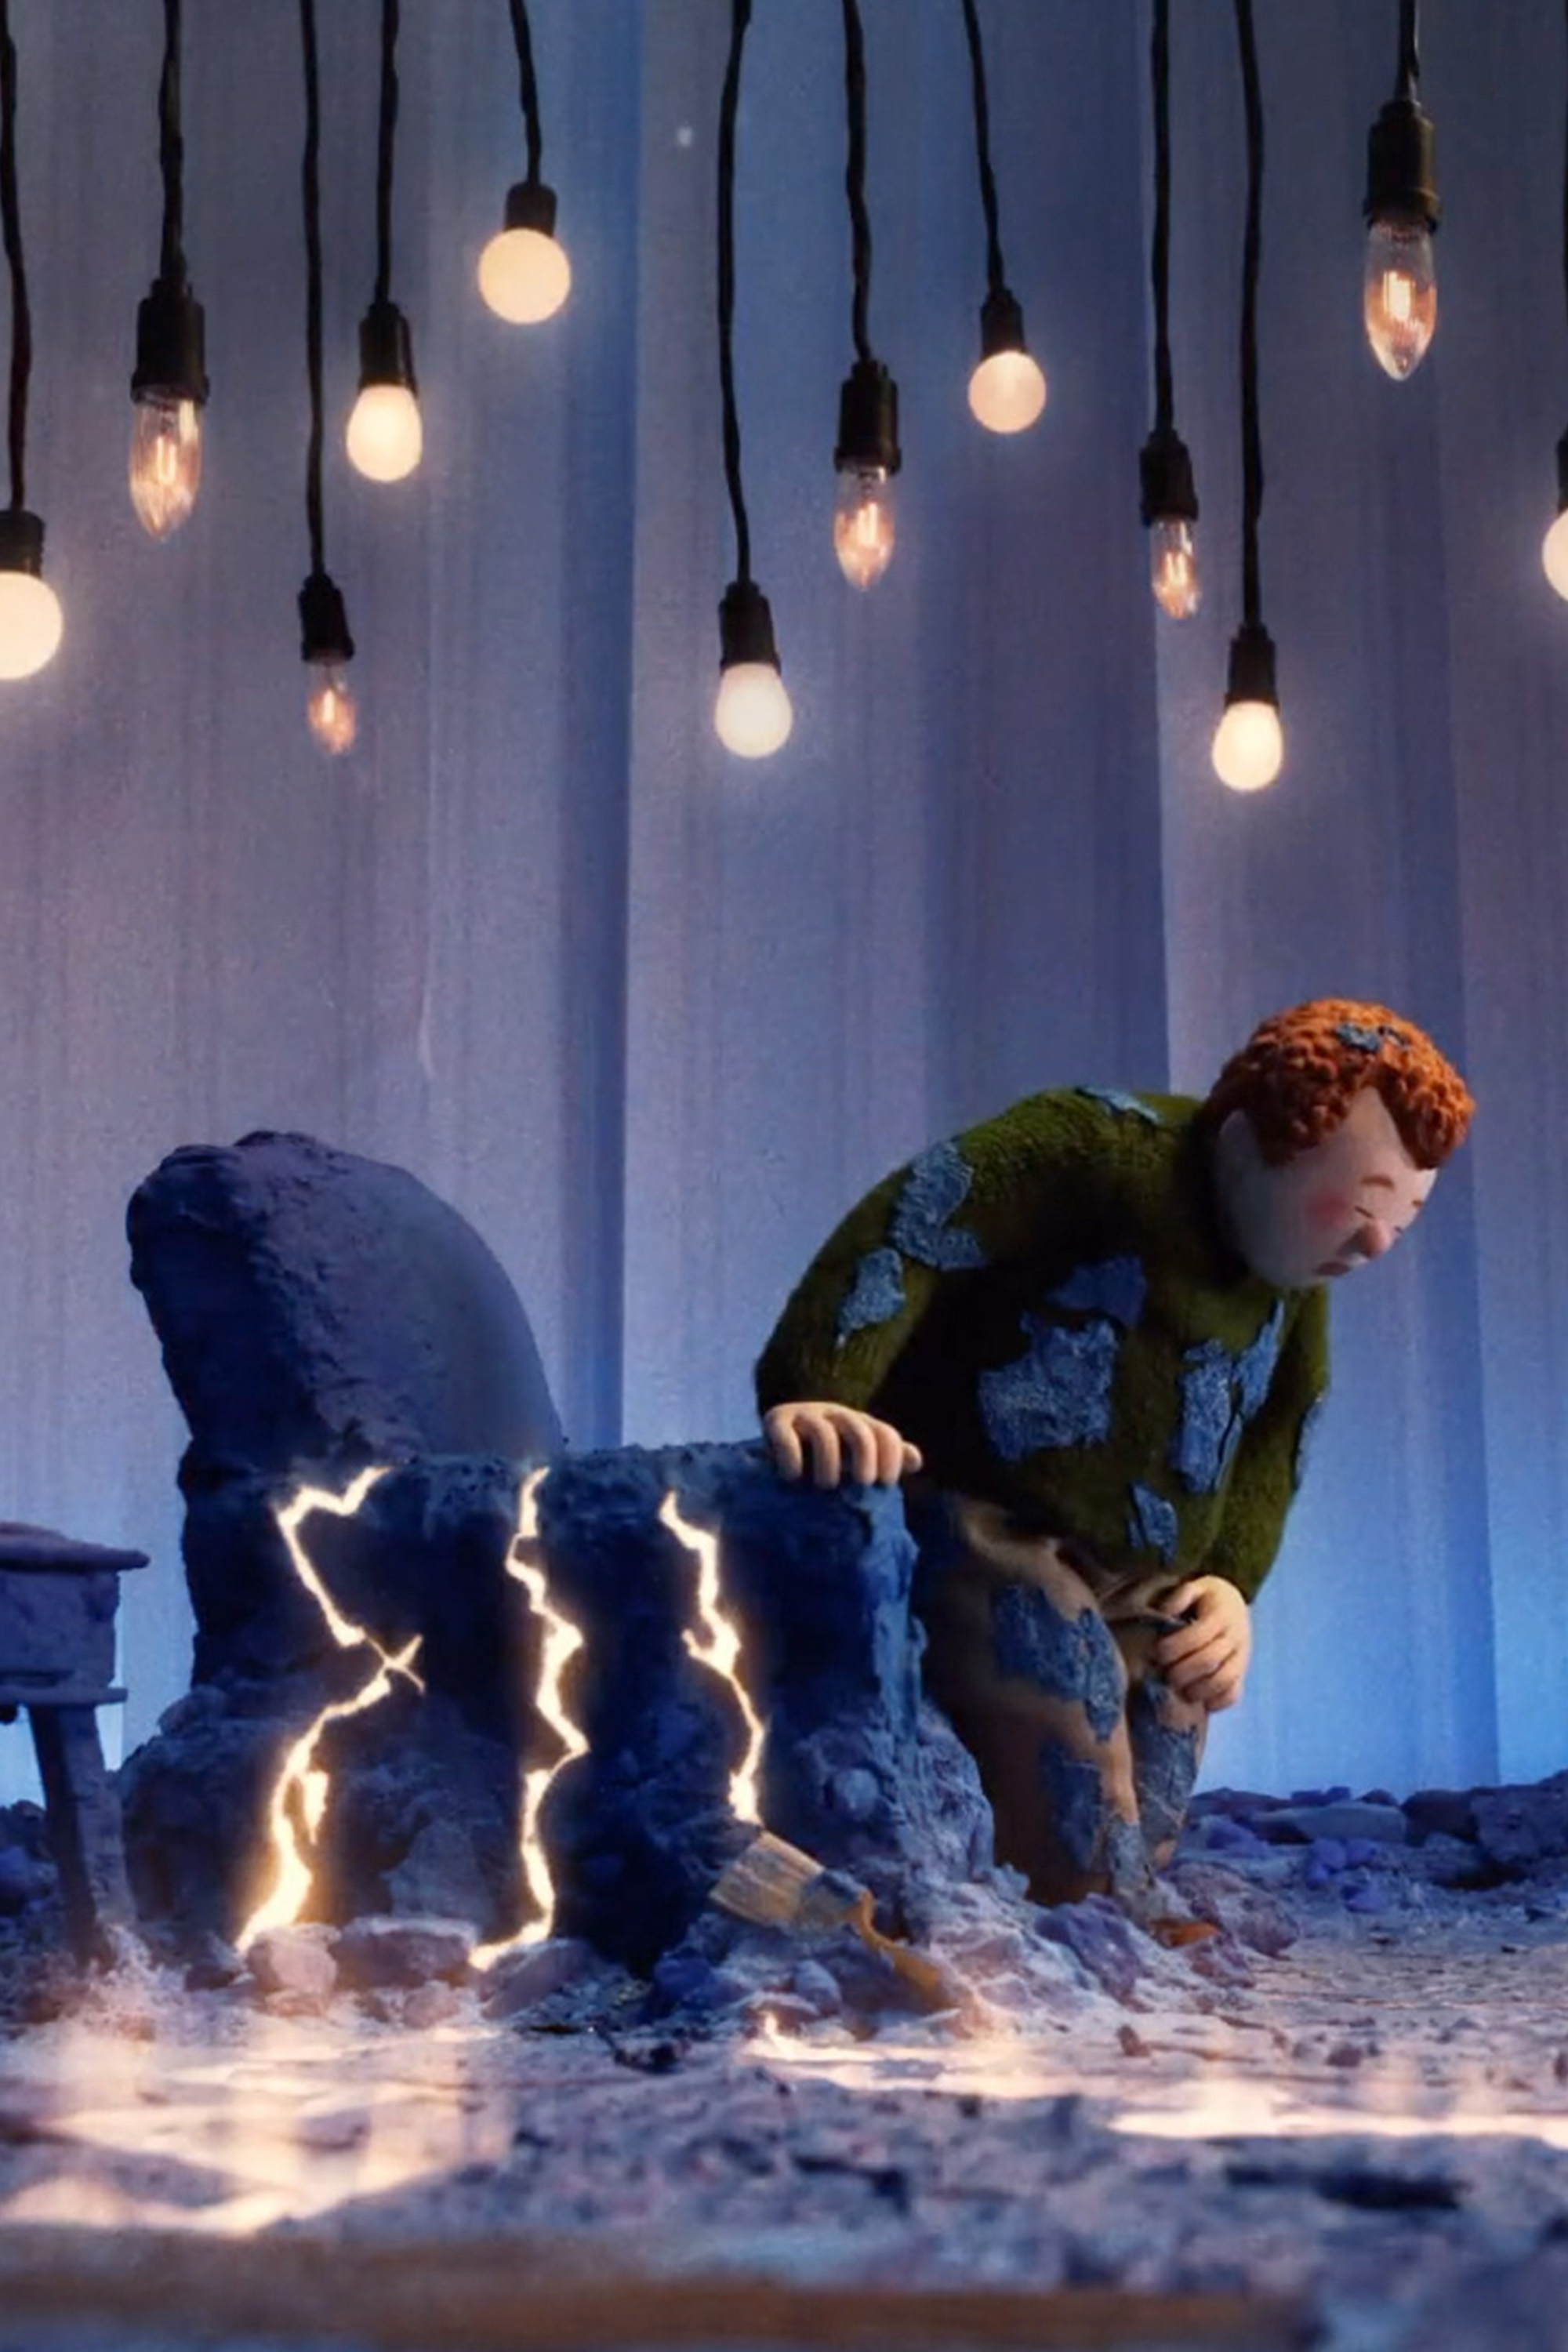 B&Q advert - man leaning on sofa chair surrounded by lights and electricity